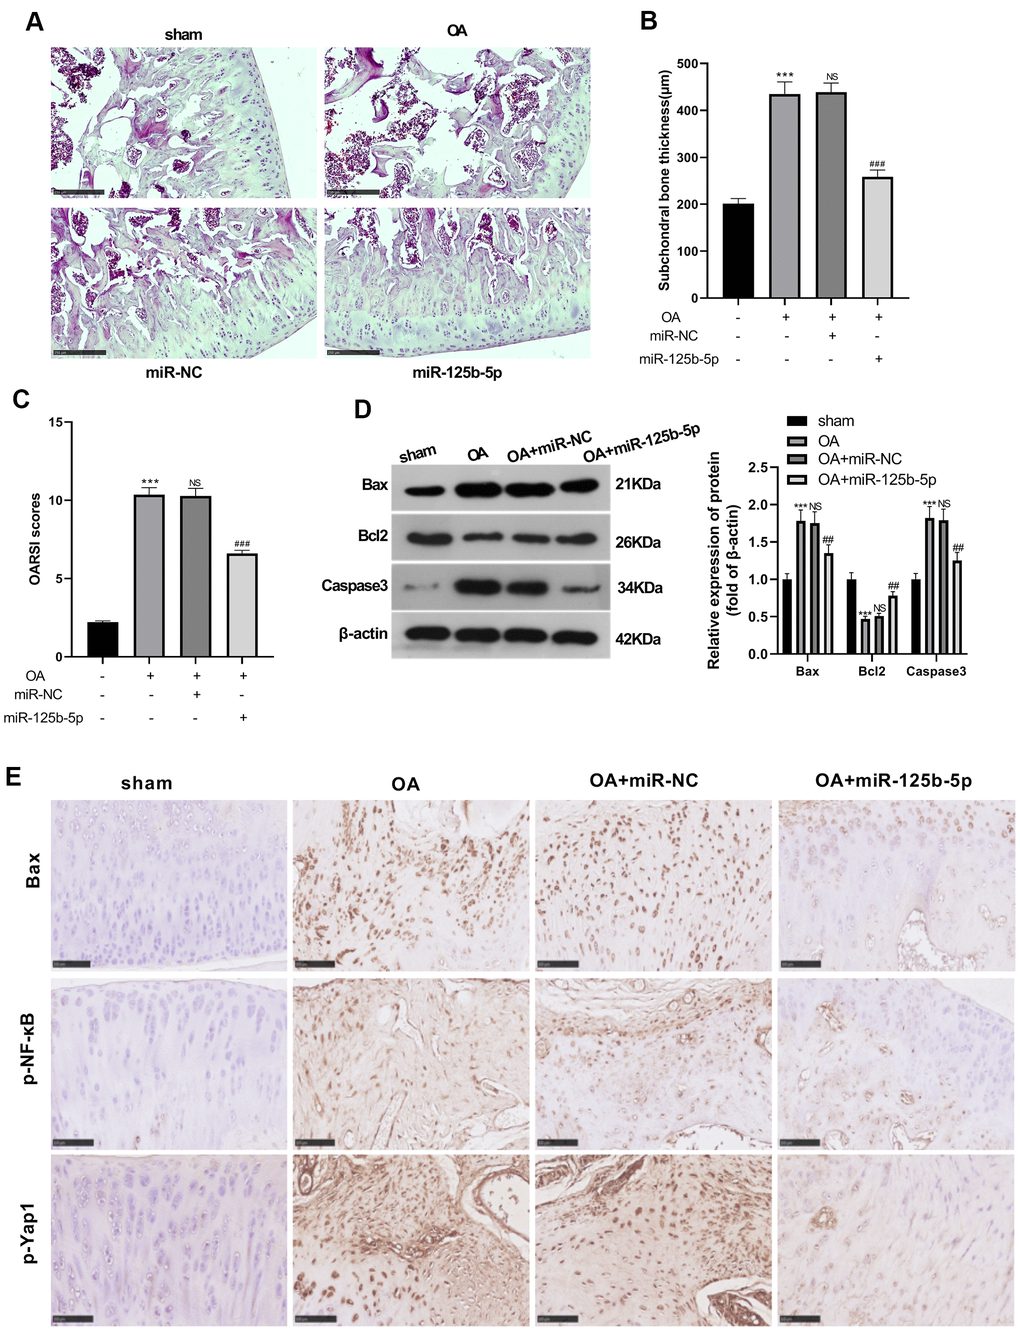 Overexpressing miR-125b-5p alleviated OA development in rats. The OA rat model was constructed by destabilization of the medial meniscus (DMM). The knee tissues of OA rats were transfected with miR-NC as the control and further transfected with miR-125b-5p mimics. (A) Safranin O staining and toluidine blue staining were carried out to observe morphological differences of the rat knee sections. (B) The thickness (μM) of the subchondral bone plate. (C) OARSI score. (D) WB detected the expression of apoptotic proteins Bax, Bcl2 and Caspase3 in the knee tissues. (E) The expression of Bax, p-YAP1 and p-NF-κB was compared by IHC. ***PP>0.05 (vs. OA group), ##P